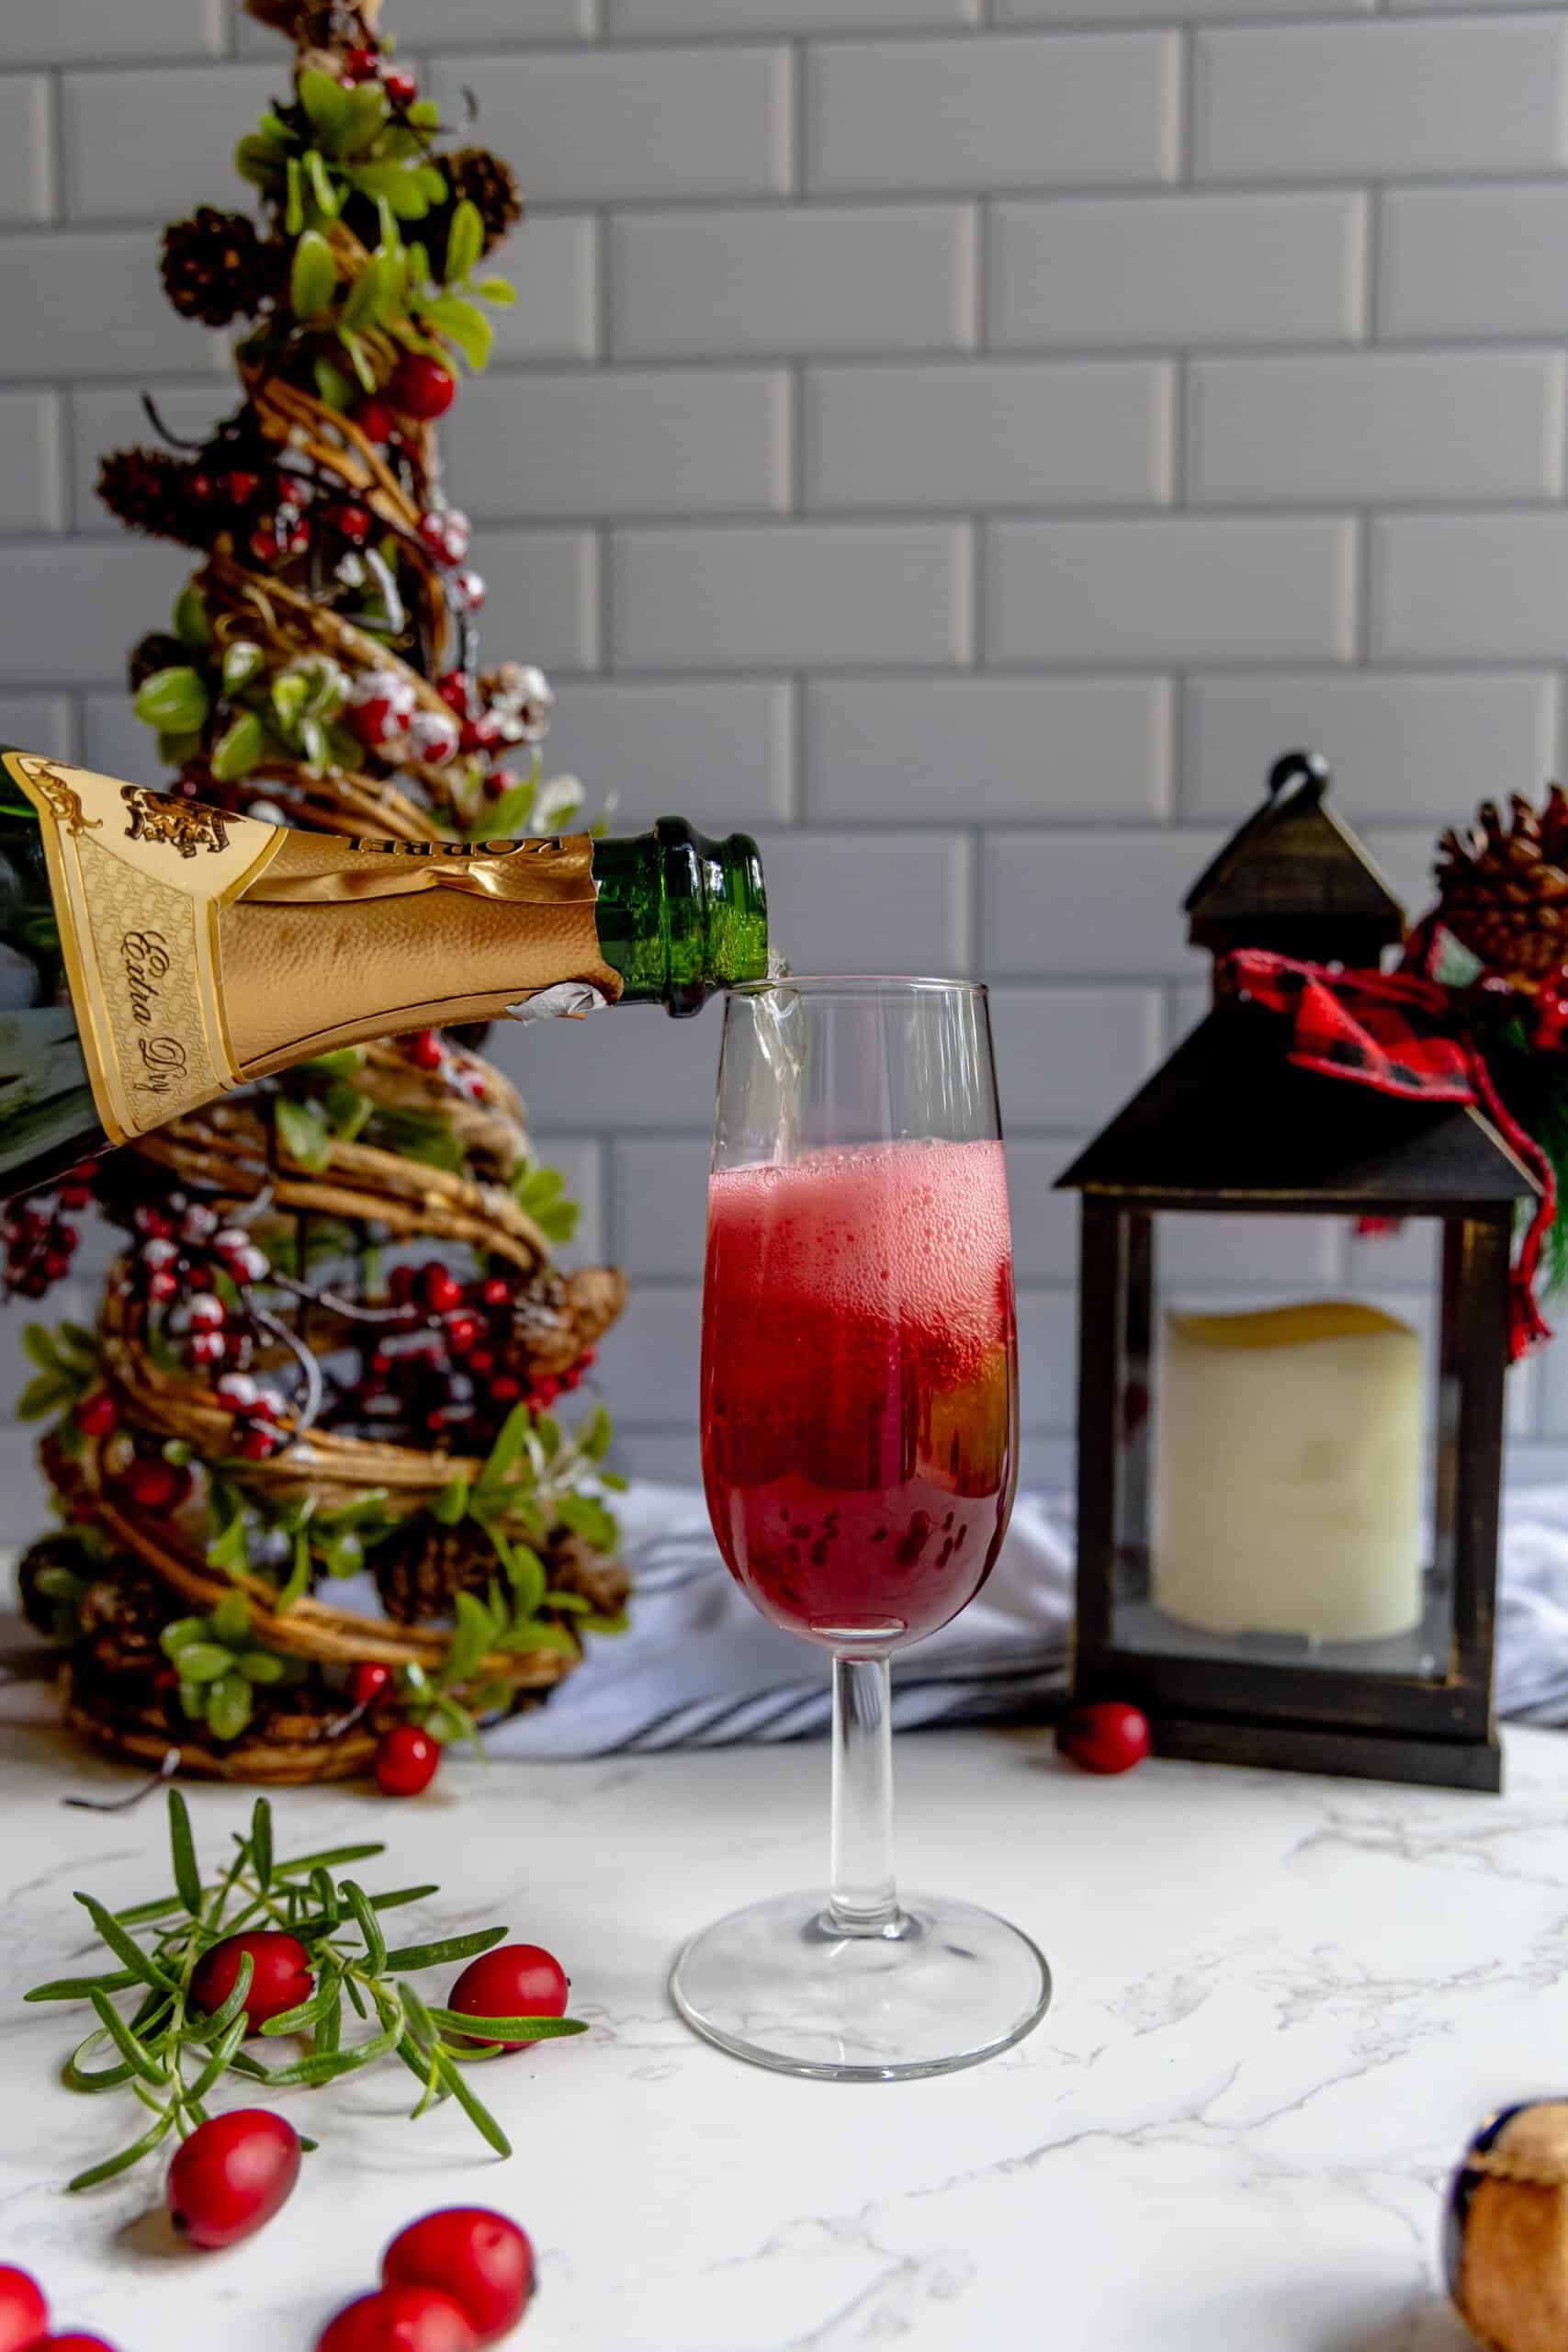 A bottle of champagne is being poured into a glass of cranberry juice, creating a refreshing cranberry champagne sparkler.